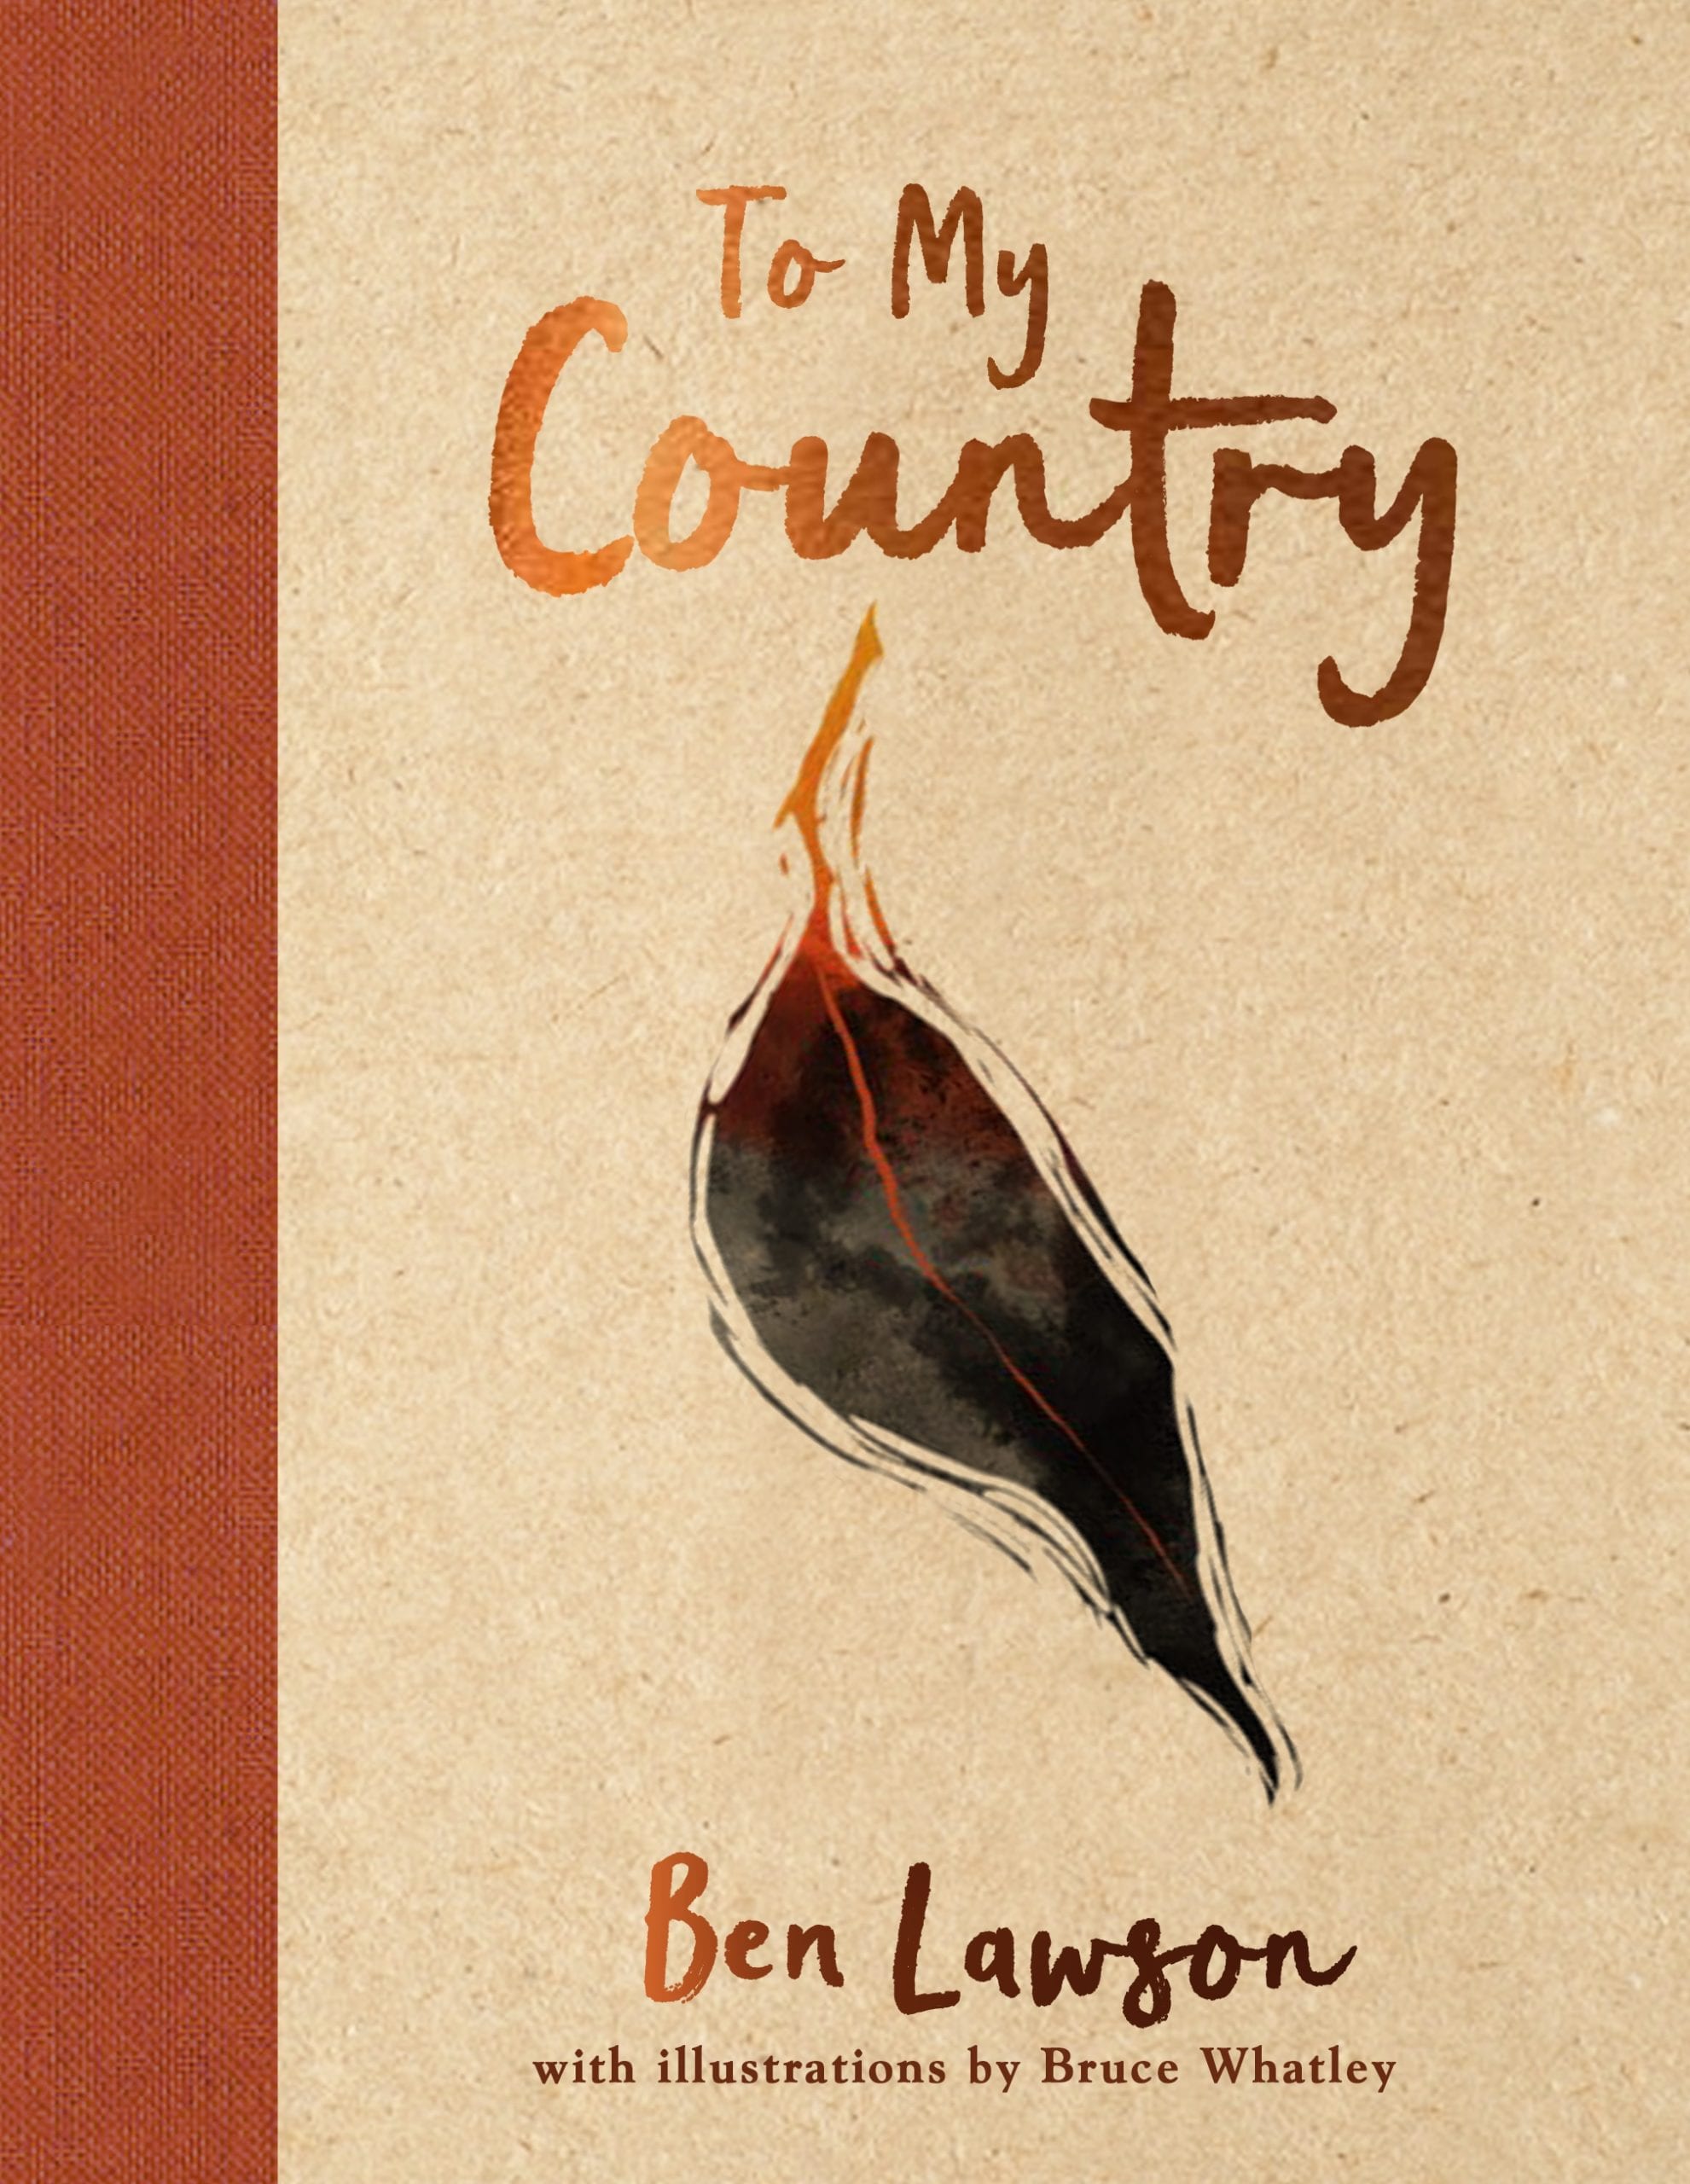 To My Country by Ben Lawson (Allen & Unwin)